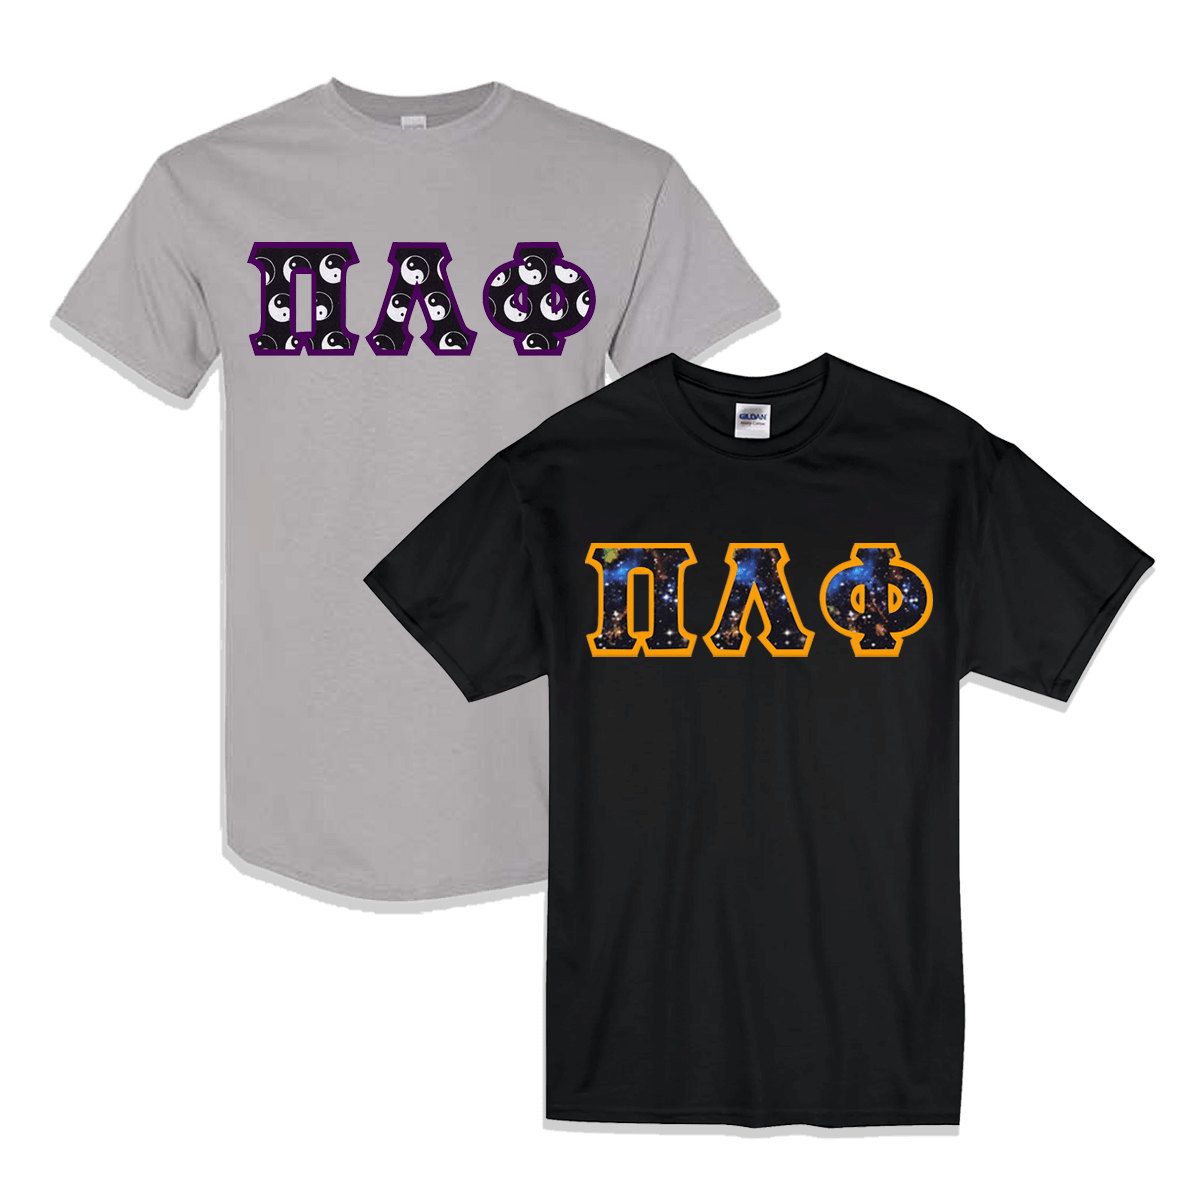 Fraternity Lettered T-Shirt, 2-Pack Bundle Deal - TWILL